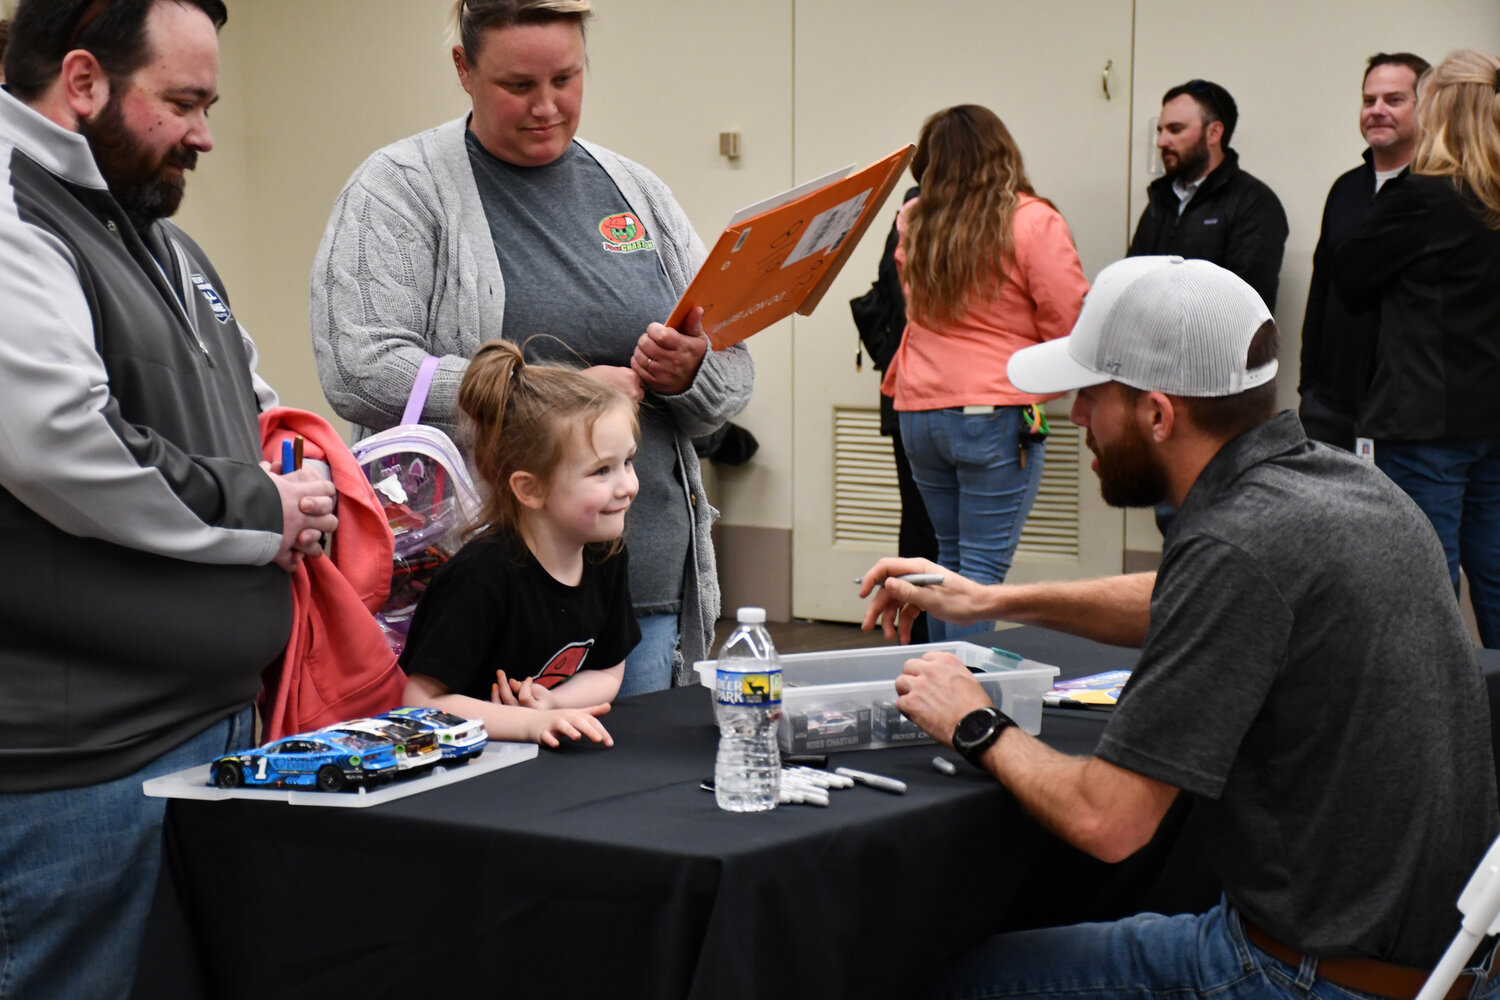 NASCAR fans were all smiles as Ross Chastain autographed their pieces Thursday.